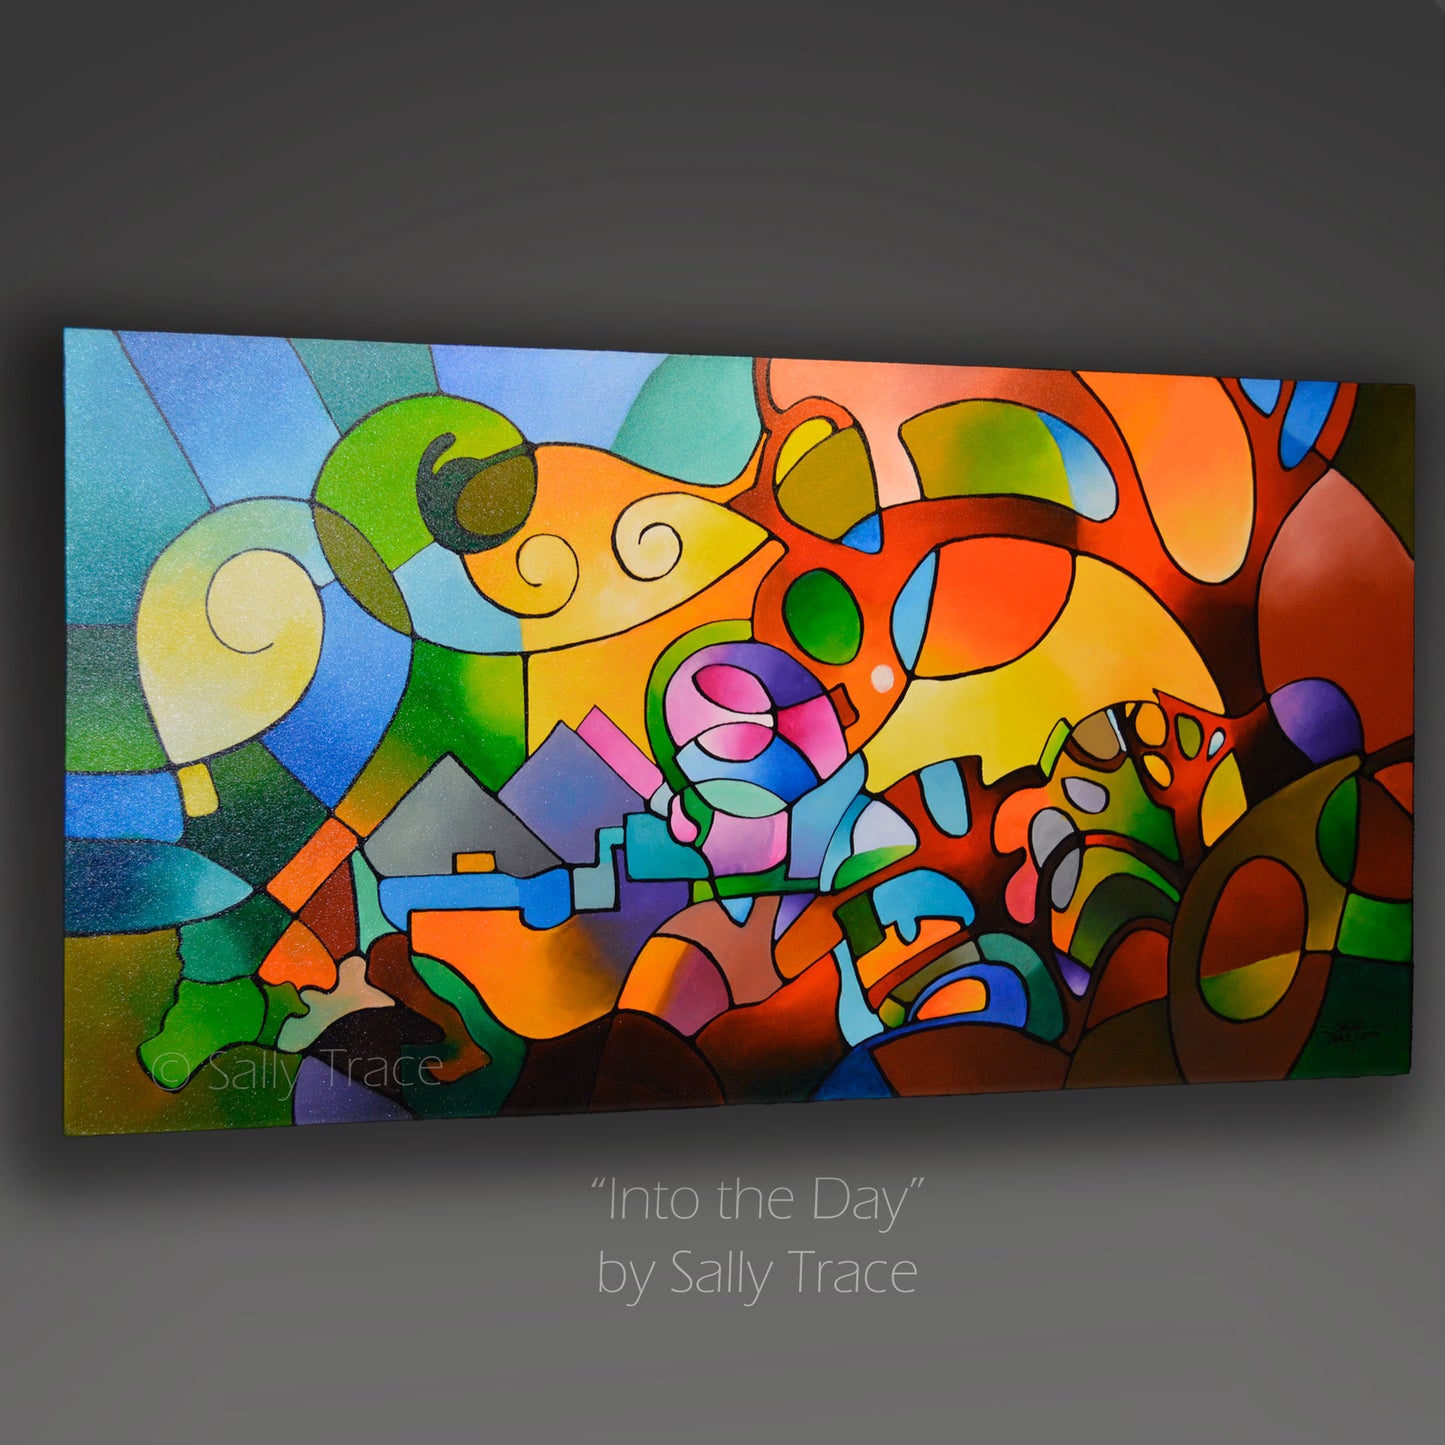 Original abstract landscape painting by Sally Trace that is about a feeling of expansiveness when one is stepping out into a new day. This is an acrylic on canvas painting in a vertical format and is 24 inches high and 48 inches wide.  This image shows the painting from a side view.